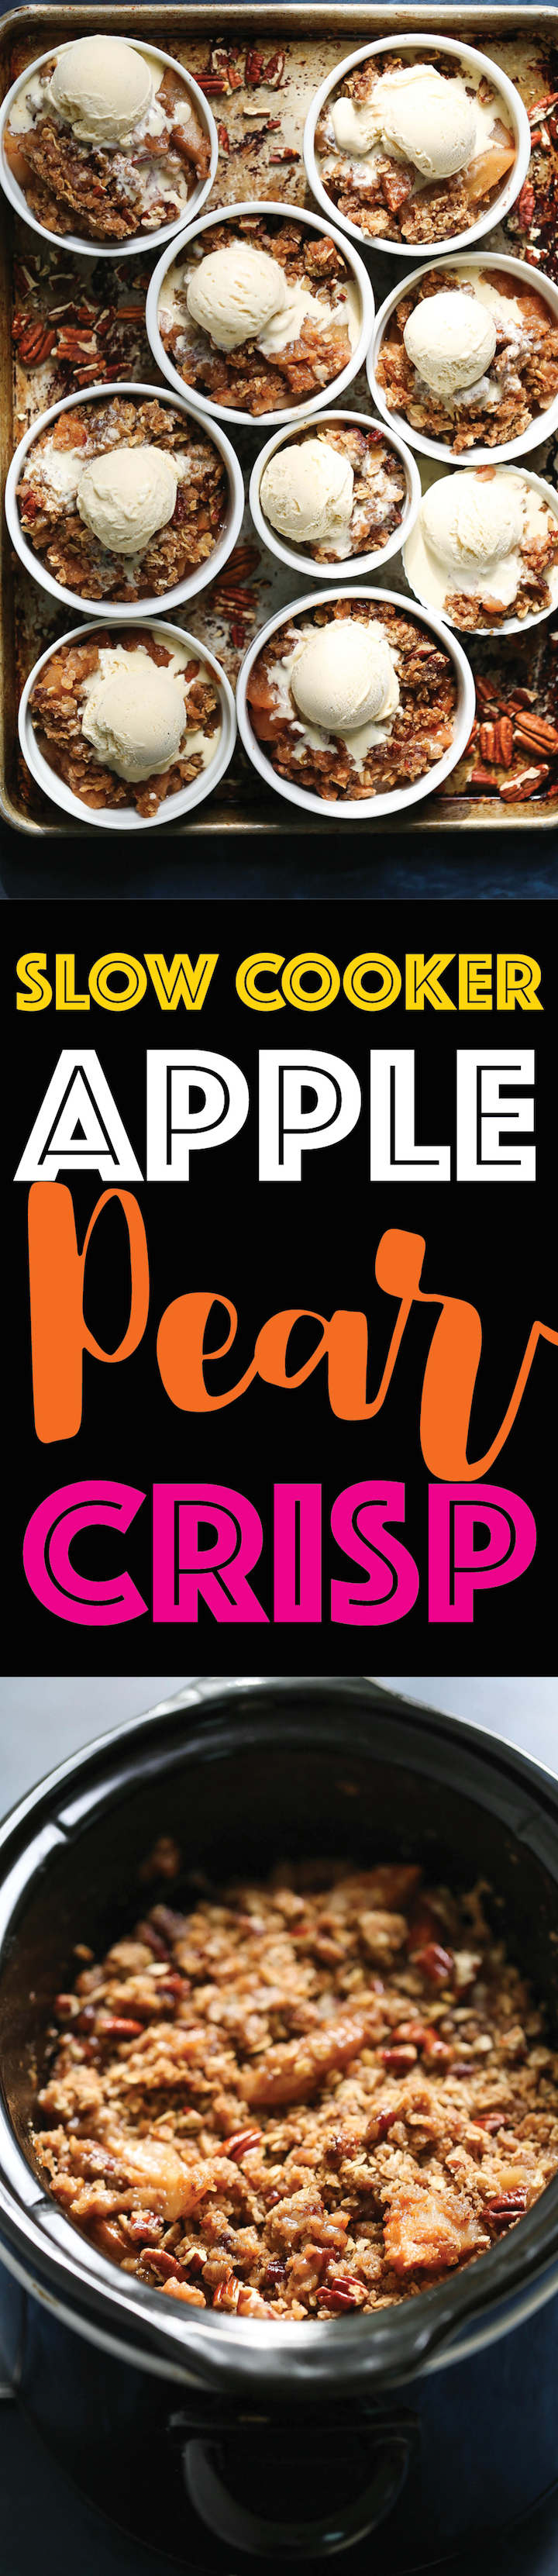 Slow Cooker Apple Pear Crisp - The easiest fuss-free apple pear crisp made right in your crockpot with a sweet crispy topping that is TO DIE FOR!!! 